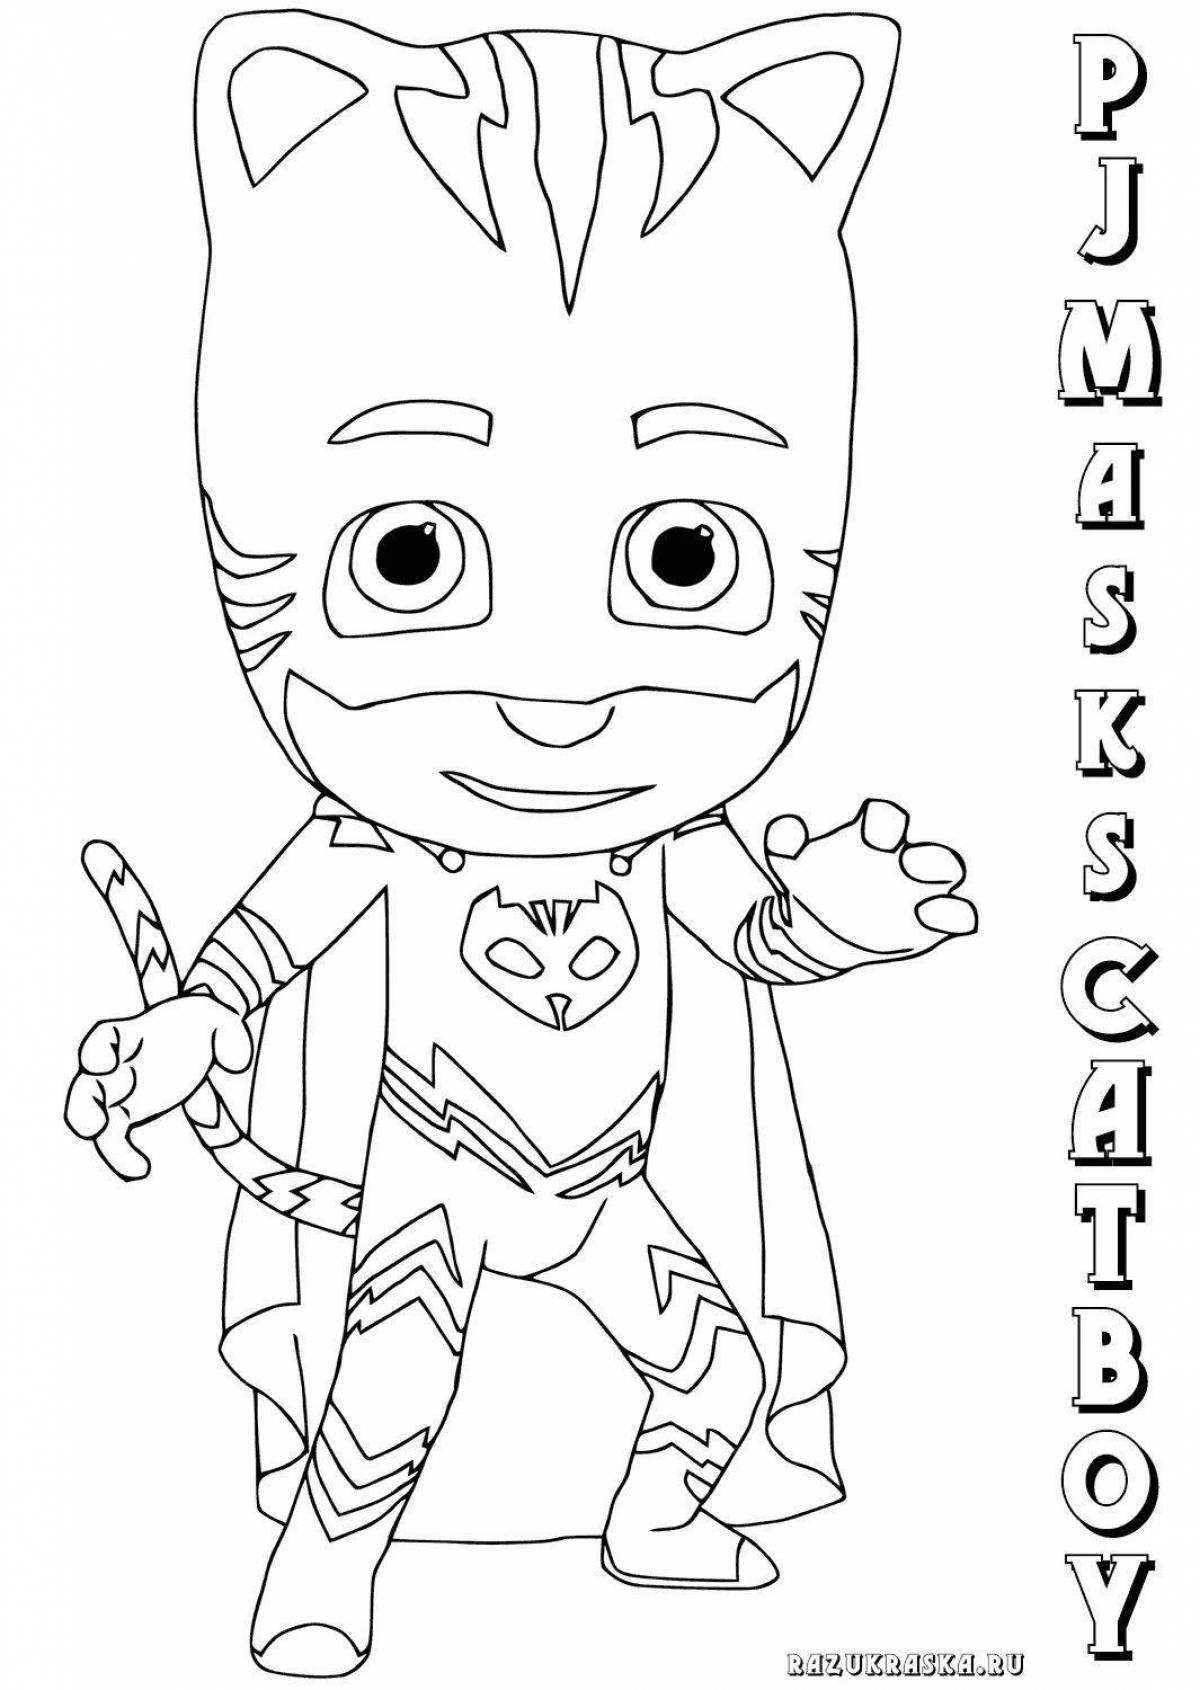 Tom chase's amazing coloring pages